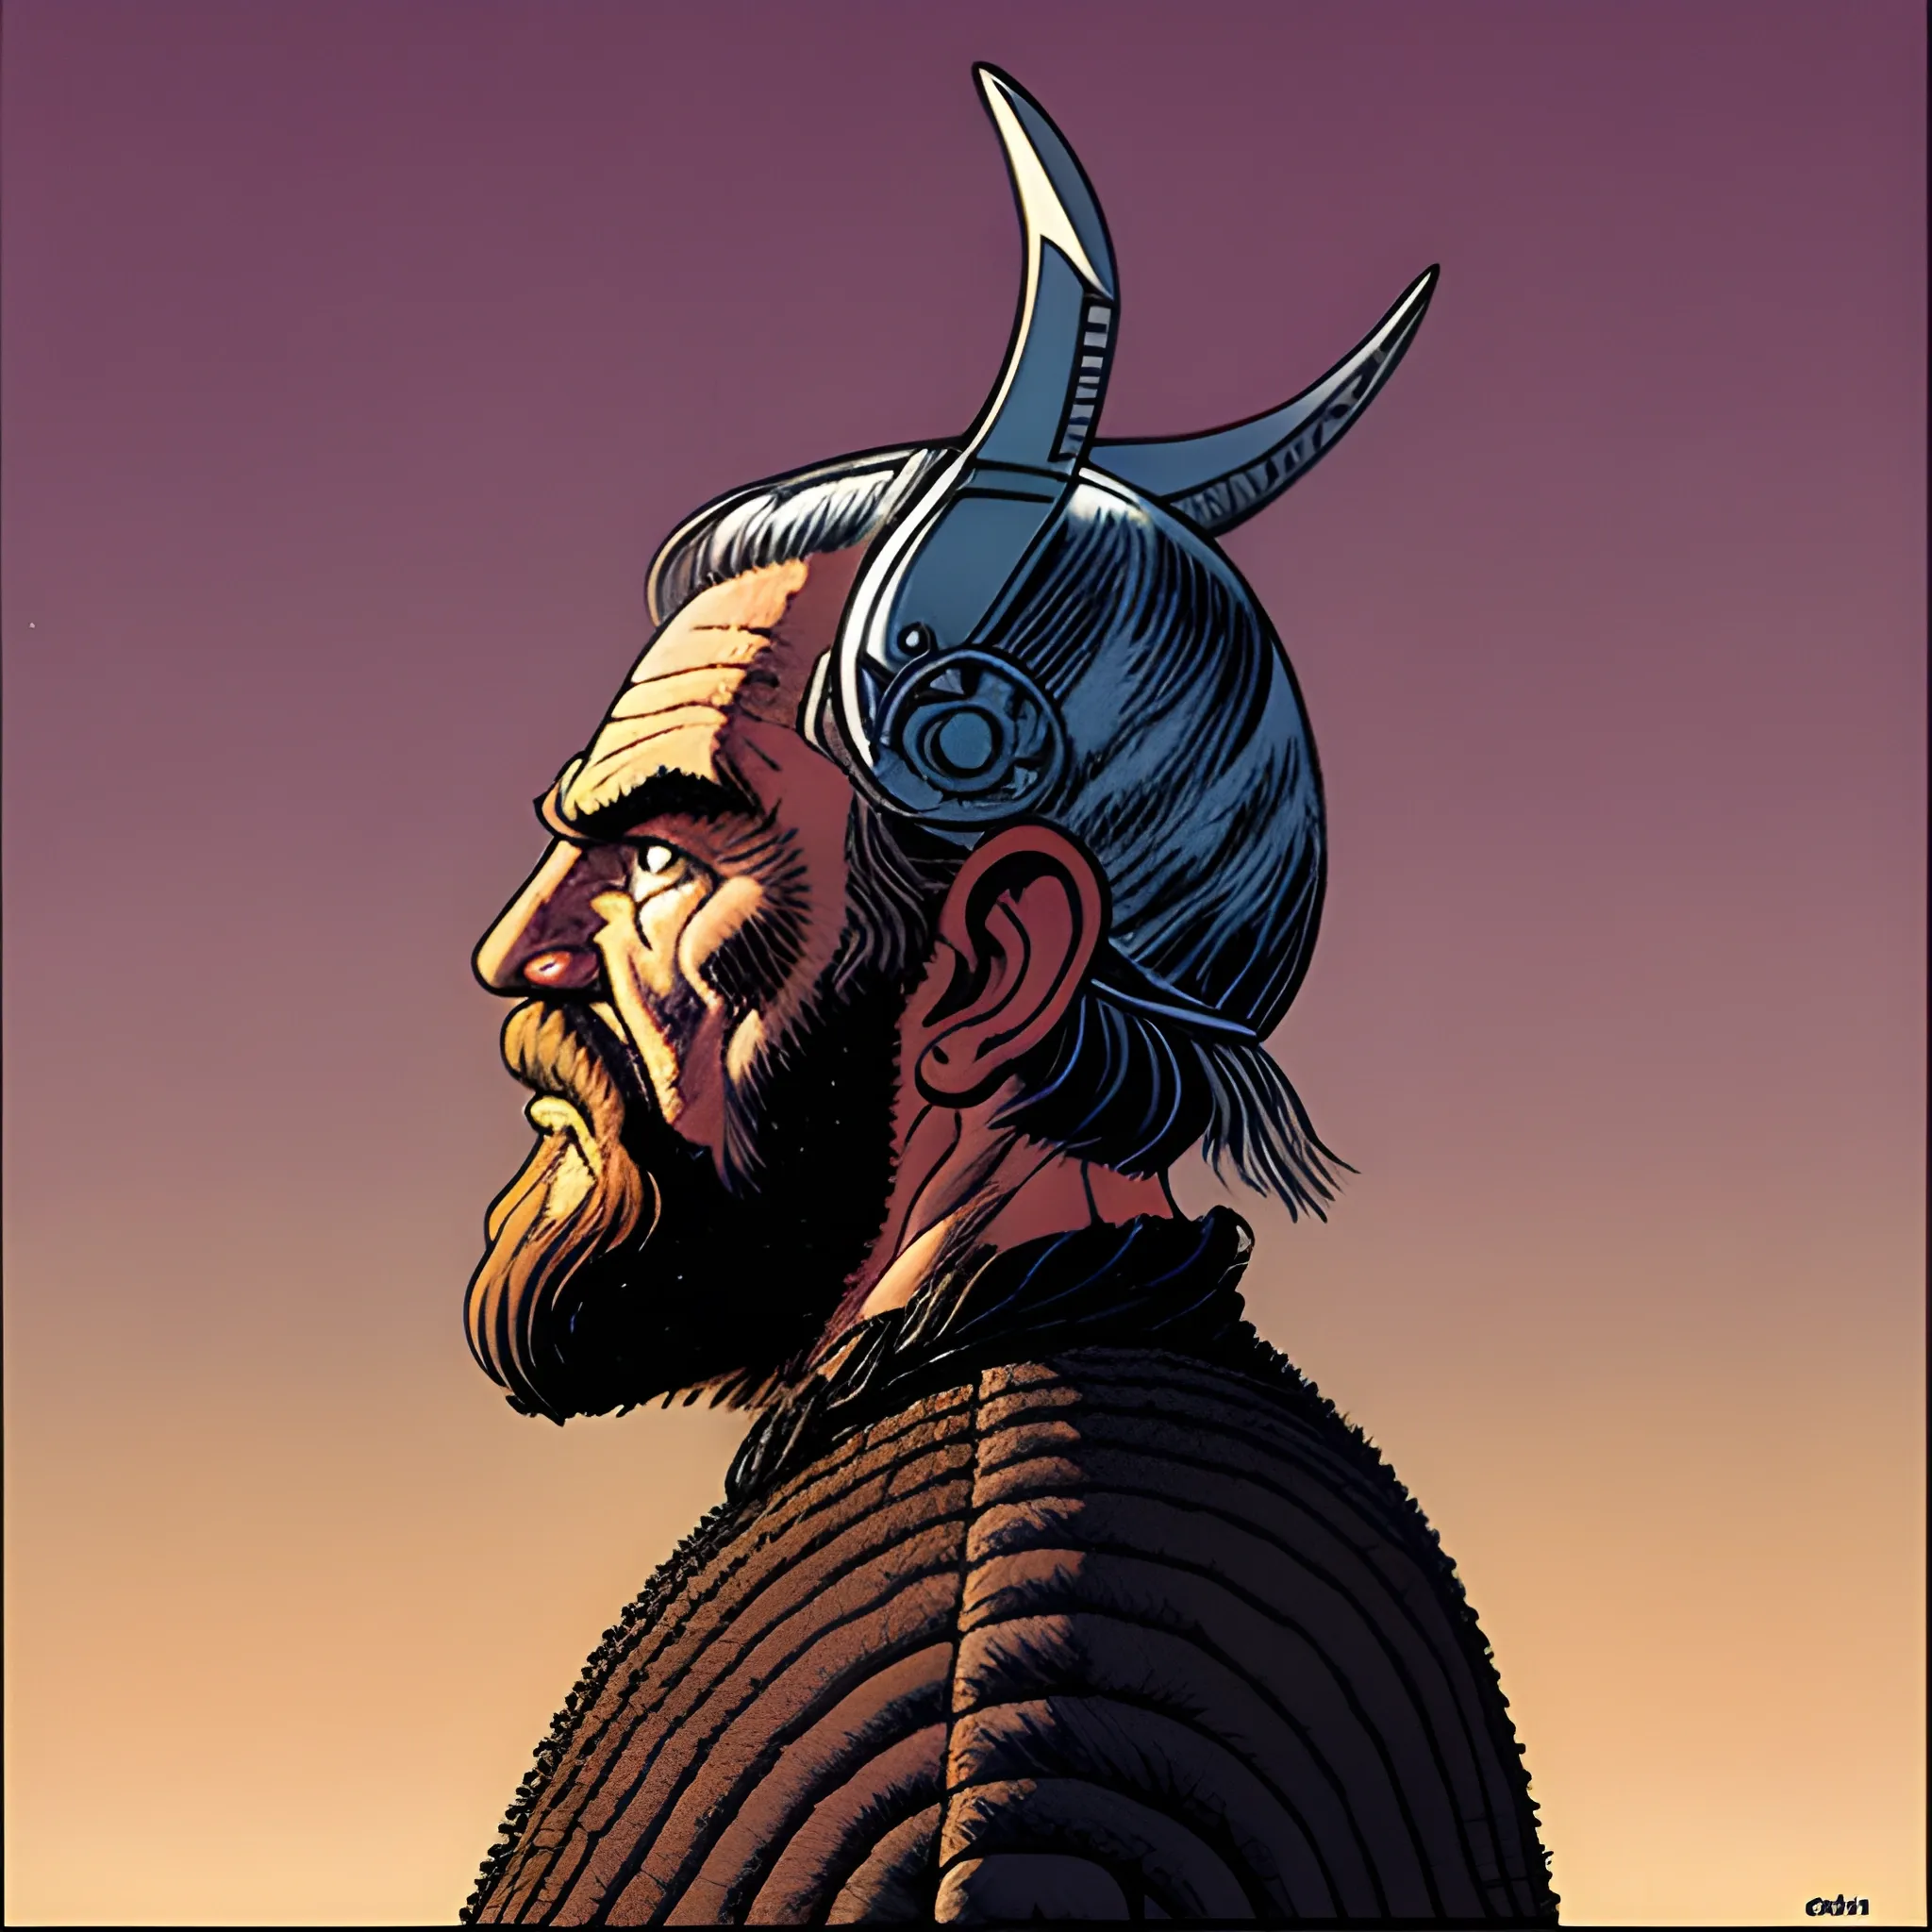 viking chieftain looking off in the distances, Drawn in Jean Giraud's art style